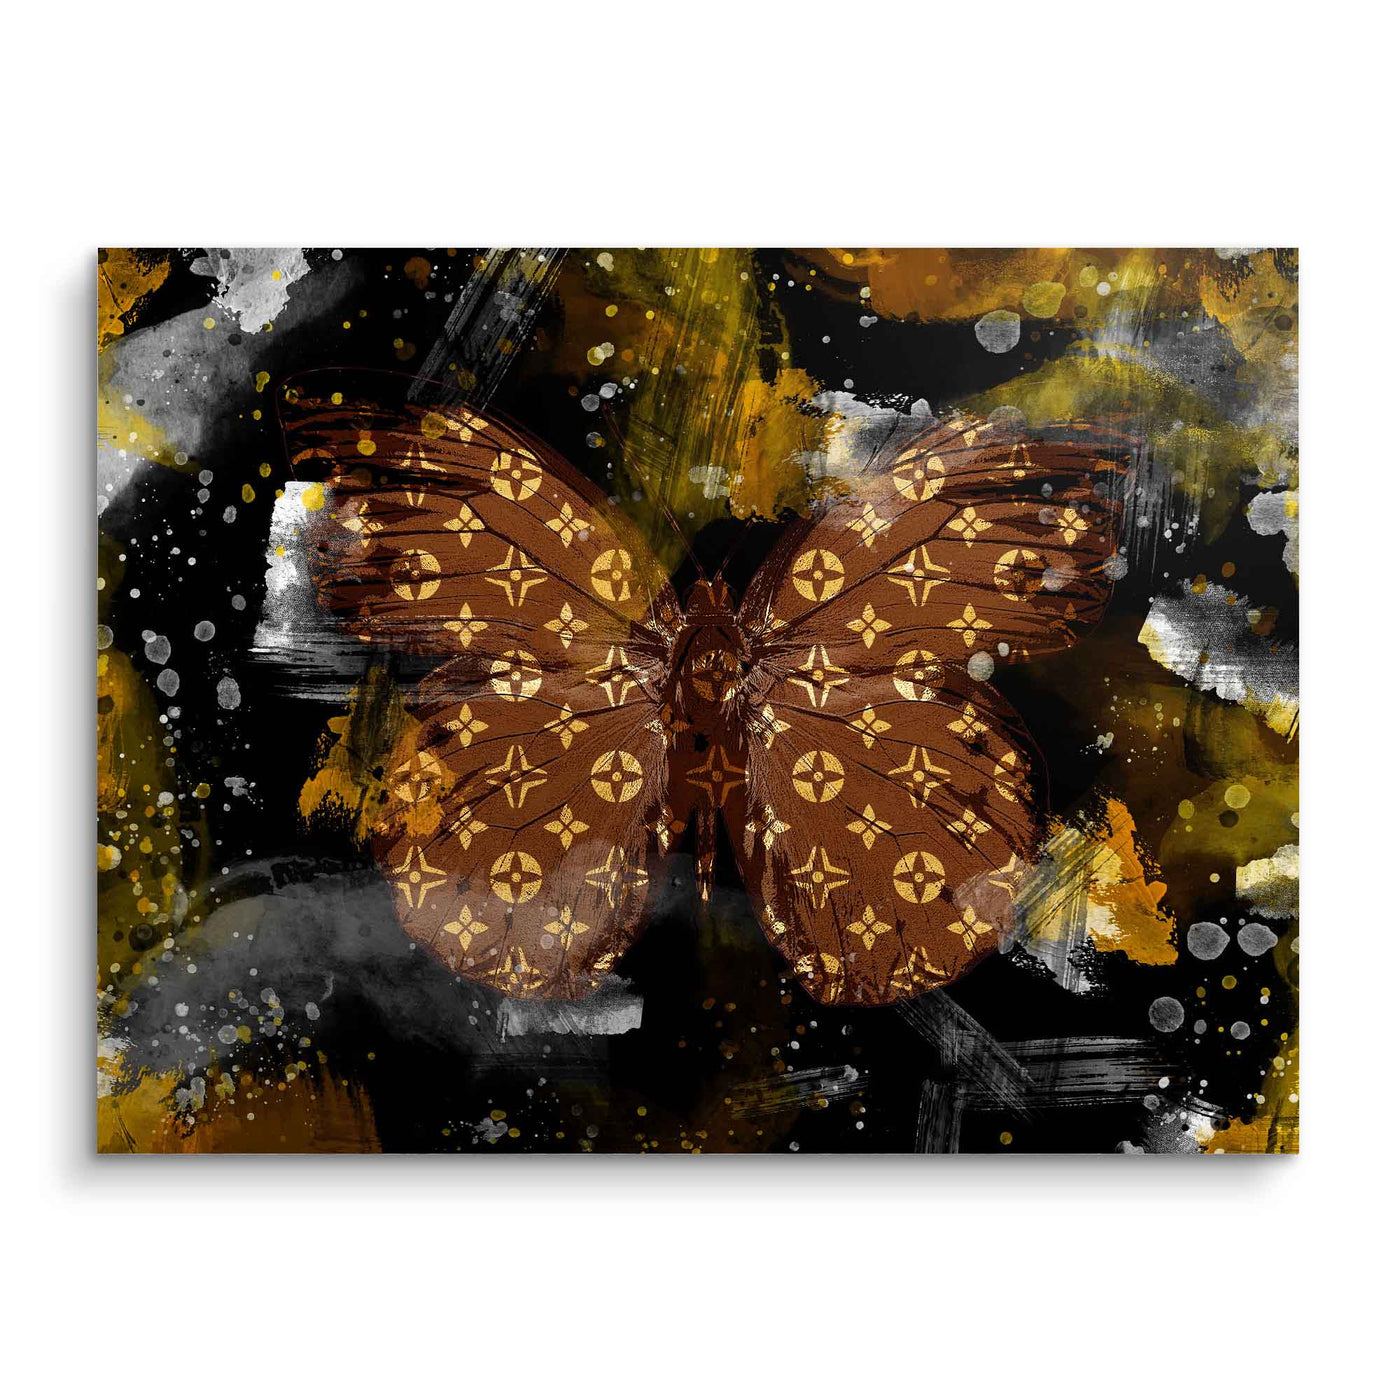 Butterfly - Bronze Edition